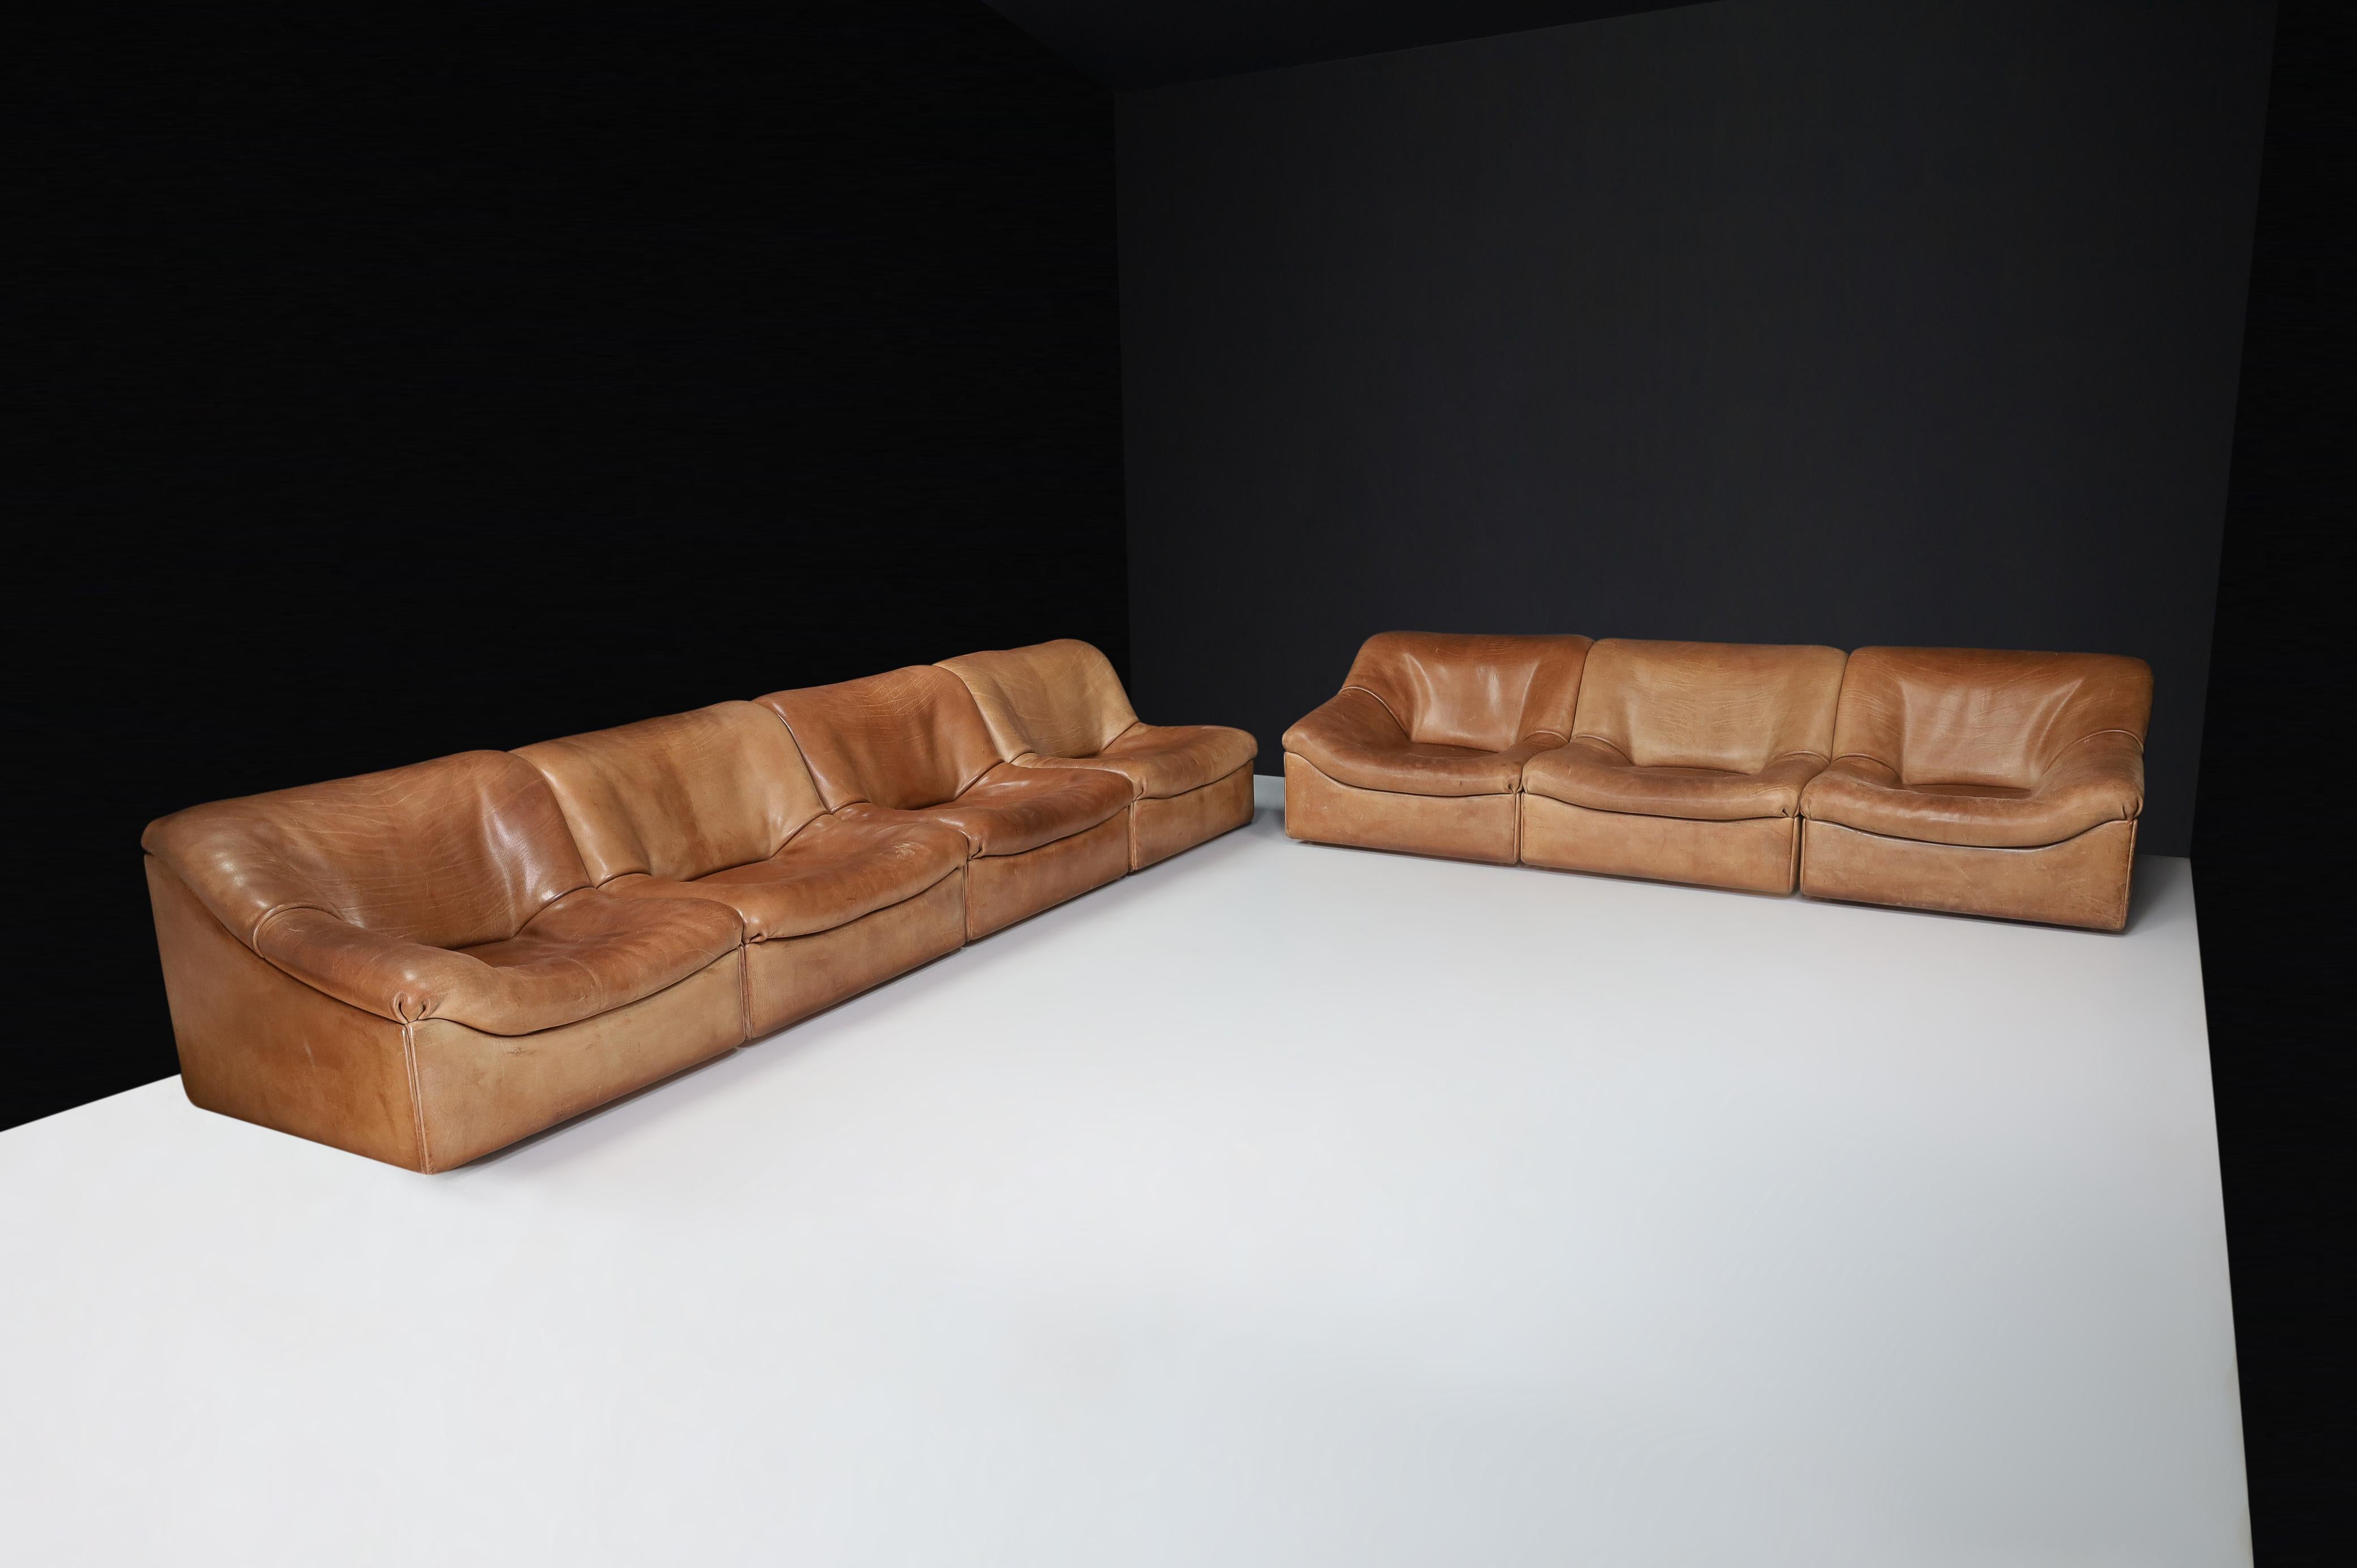 De Sede DS46 Sectional sofa-Living room set in Patinated Cognac Brown Buffalo Leather, Switzerland 1970s
This De Sede DS 46 sectional sofa-living room set is a one-of-a-kind piece, crafted from thick cognac leather and boasting a sleek and modern